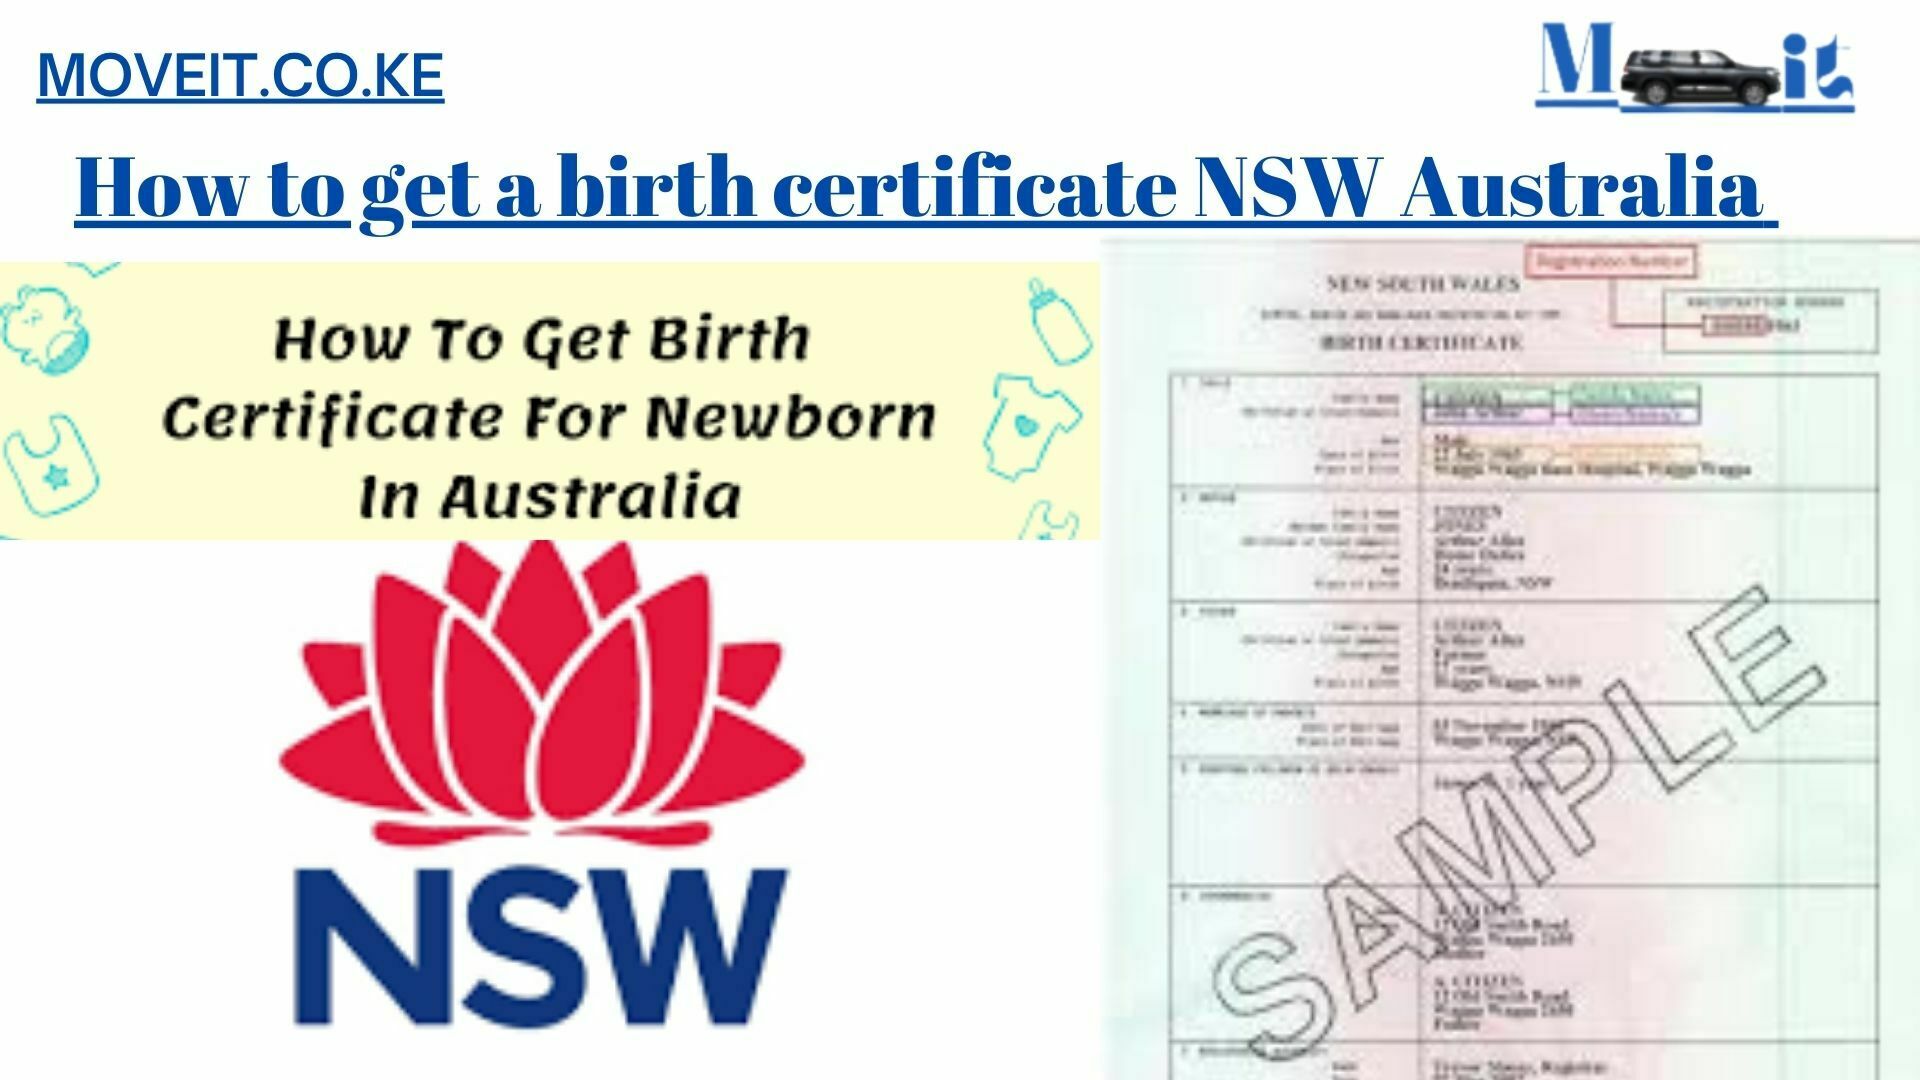 How to get a birth certificate NSW Australia MOVE IT